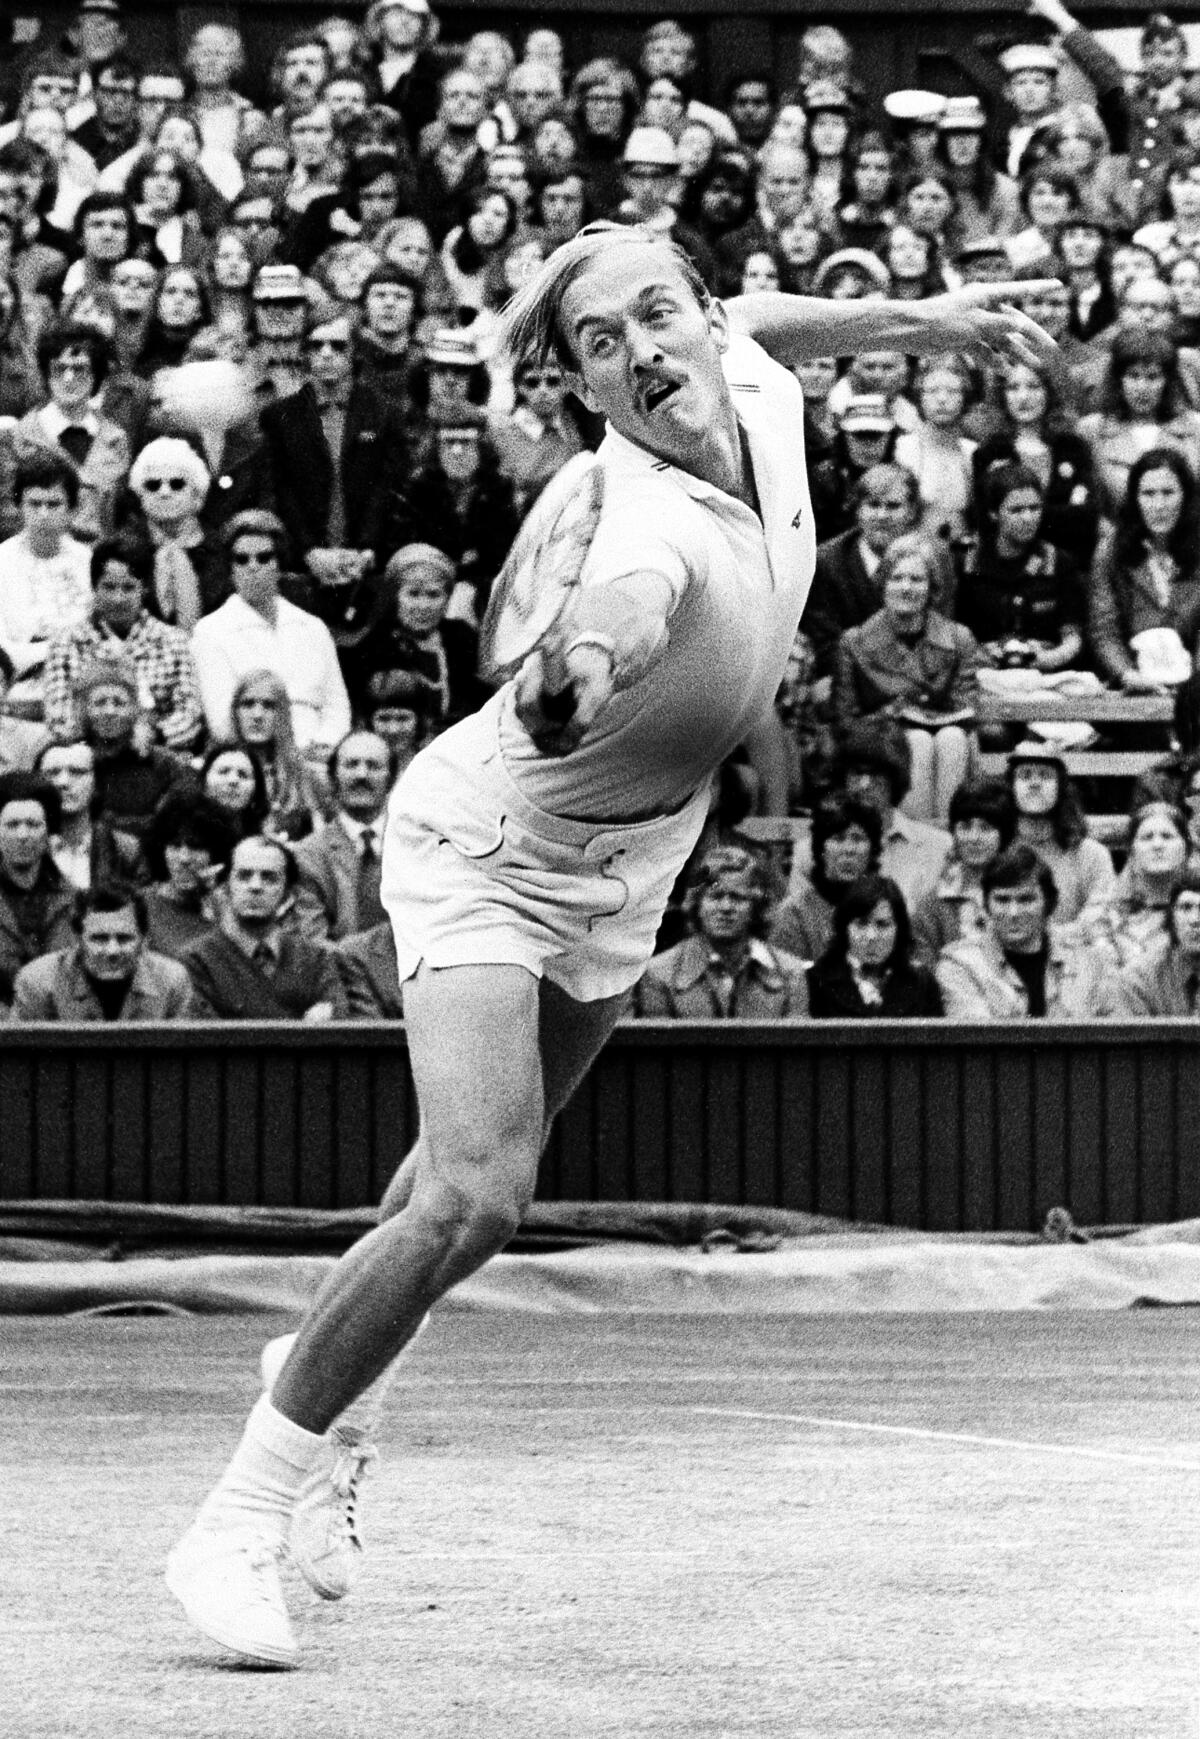 Stan Smith of the United States returns the ball to Ilie Nastase of Romania during Wimbledon action in 1972.